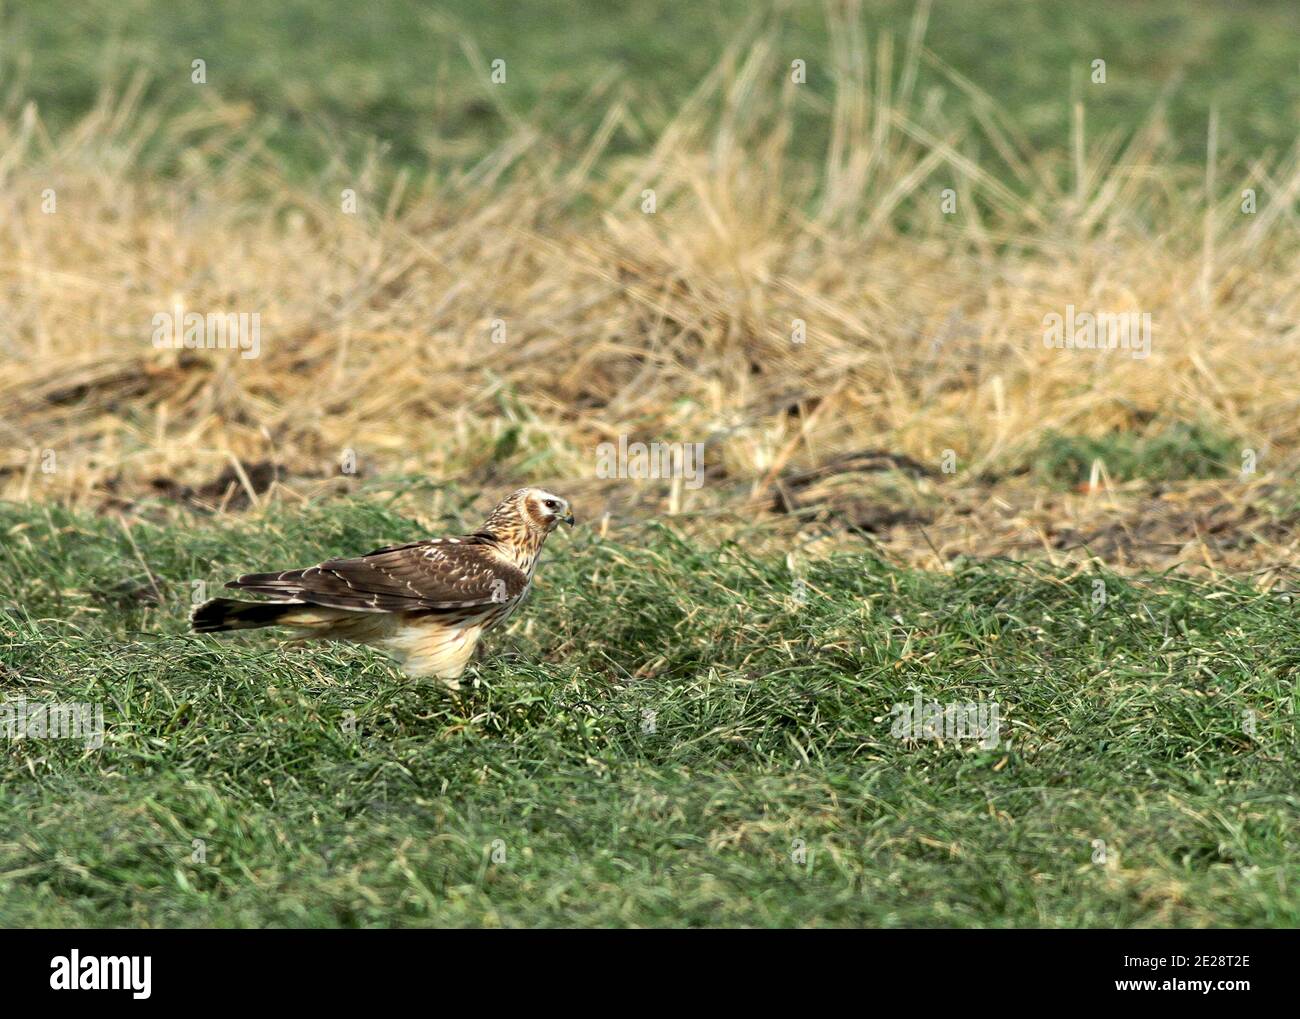 hen harrier (Circus cyaneus), Second calender year female standing, seen from the side., Netherlands Stock Photo